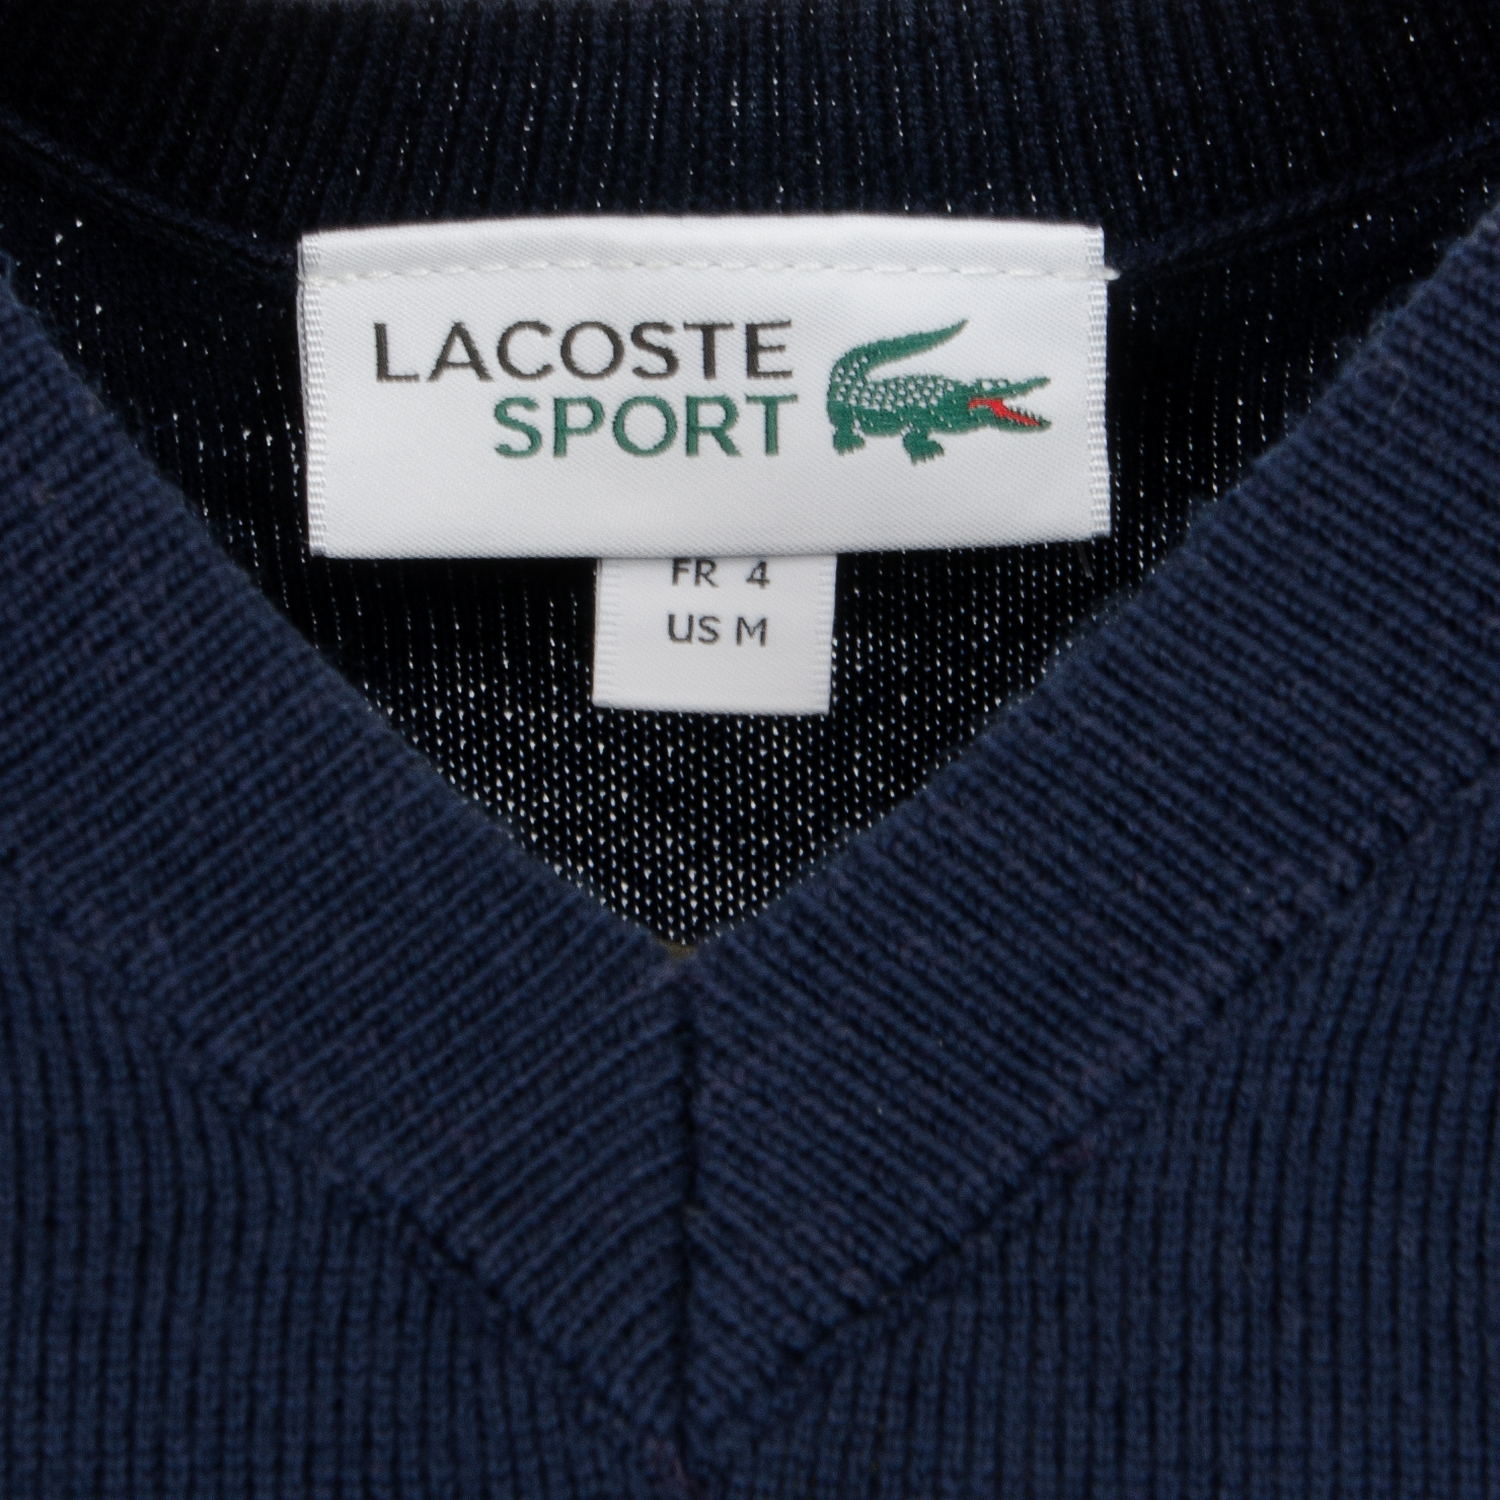 Lacoste Ryder Cup Edition V-Neck Sweater Silver Chine/White ...